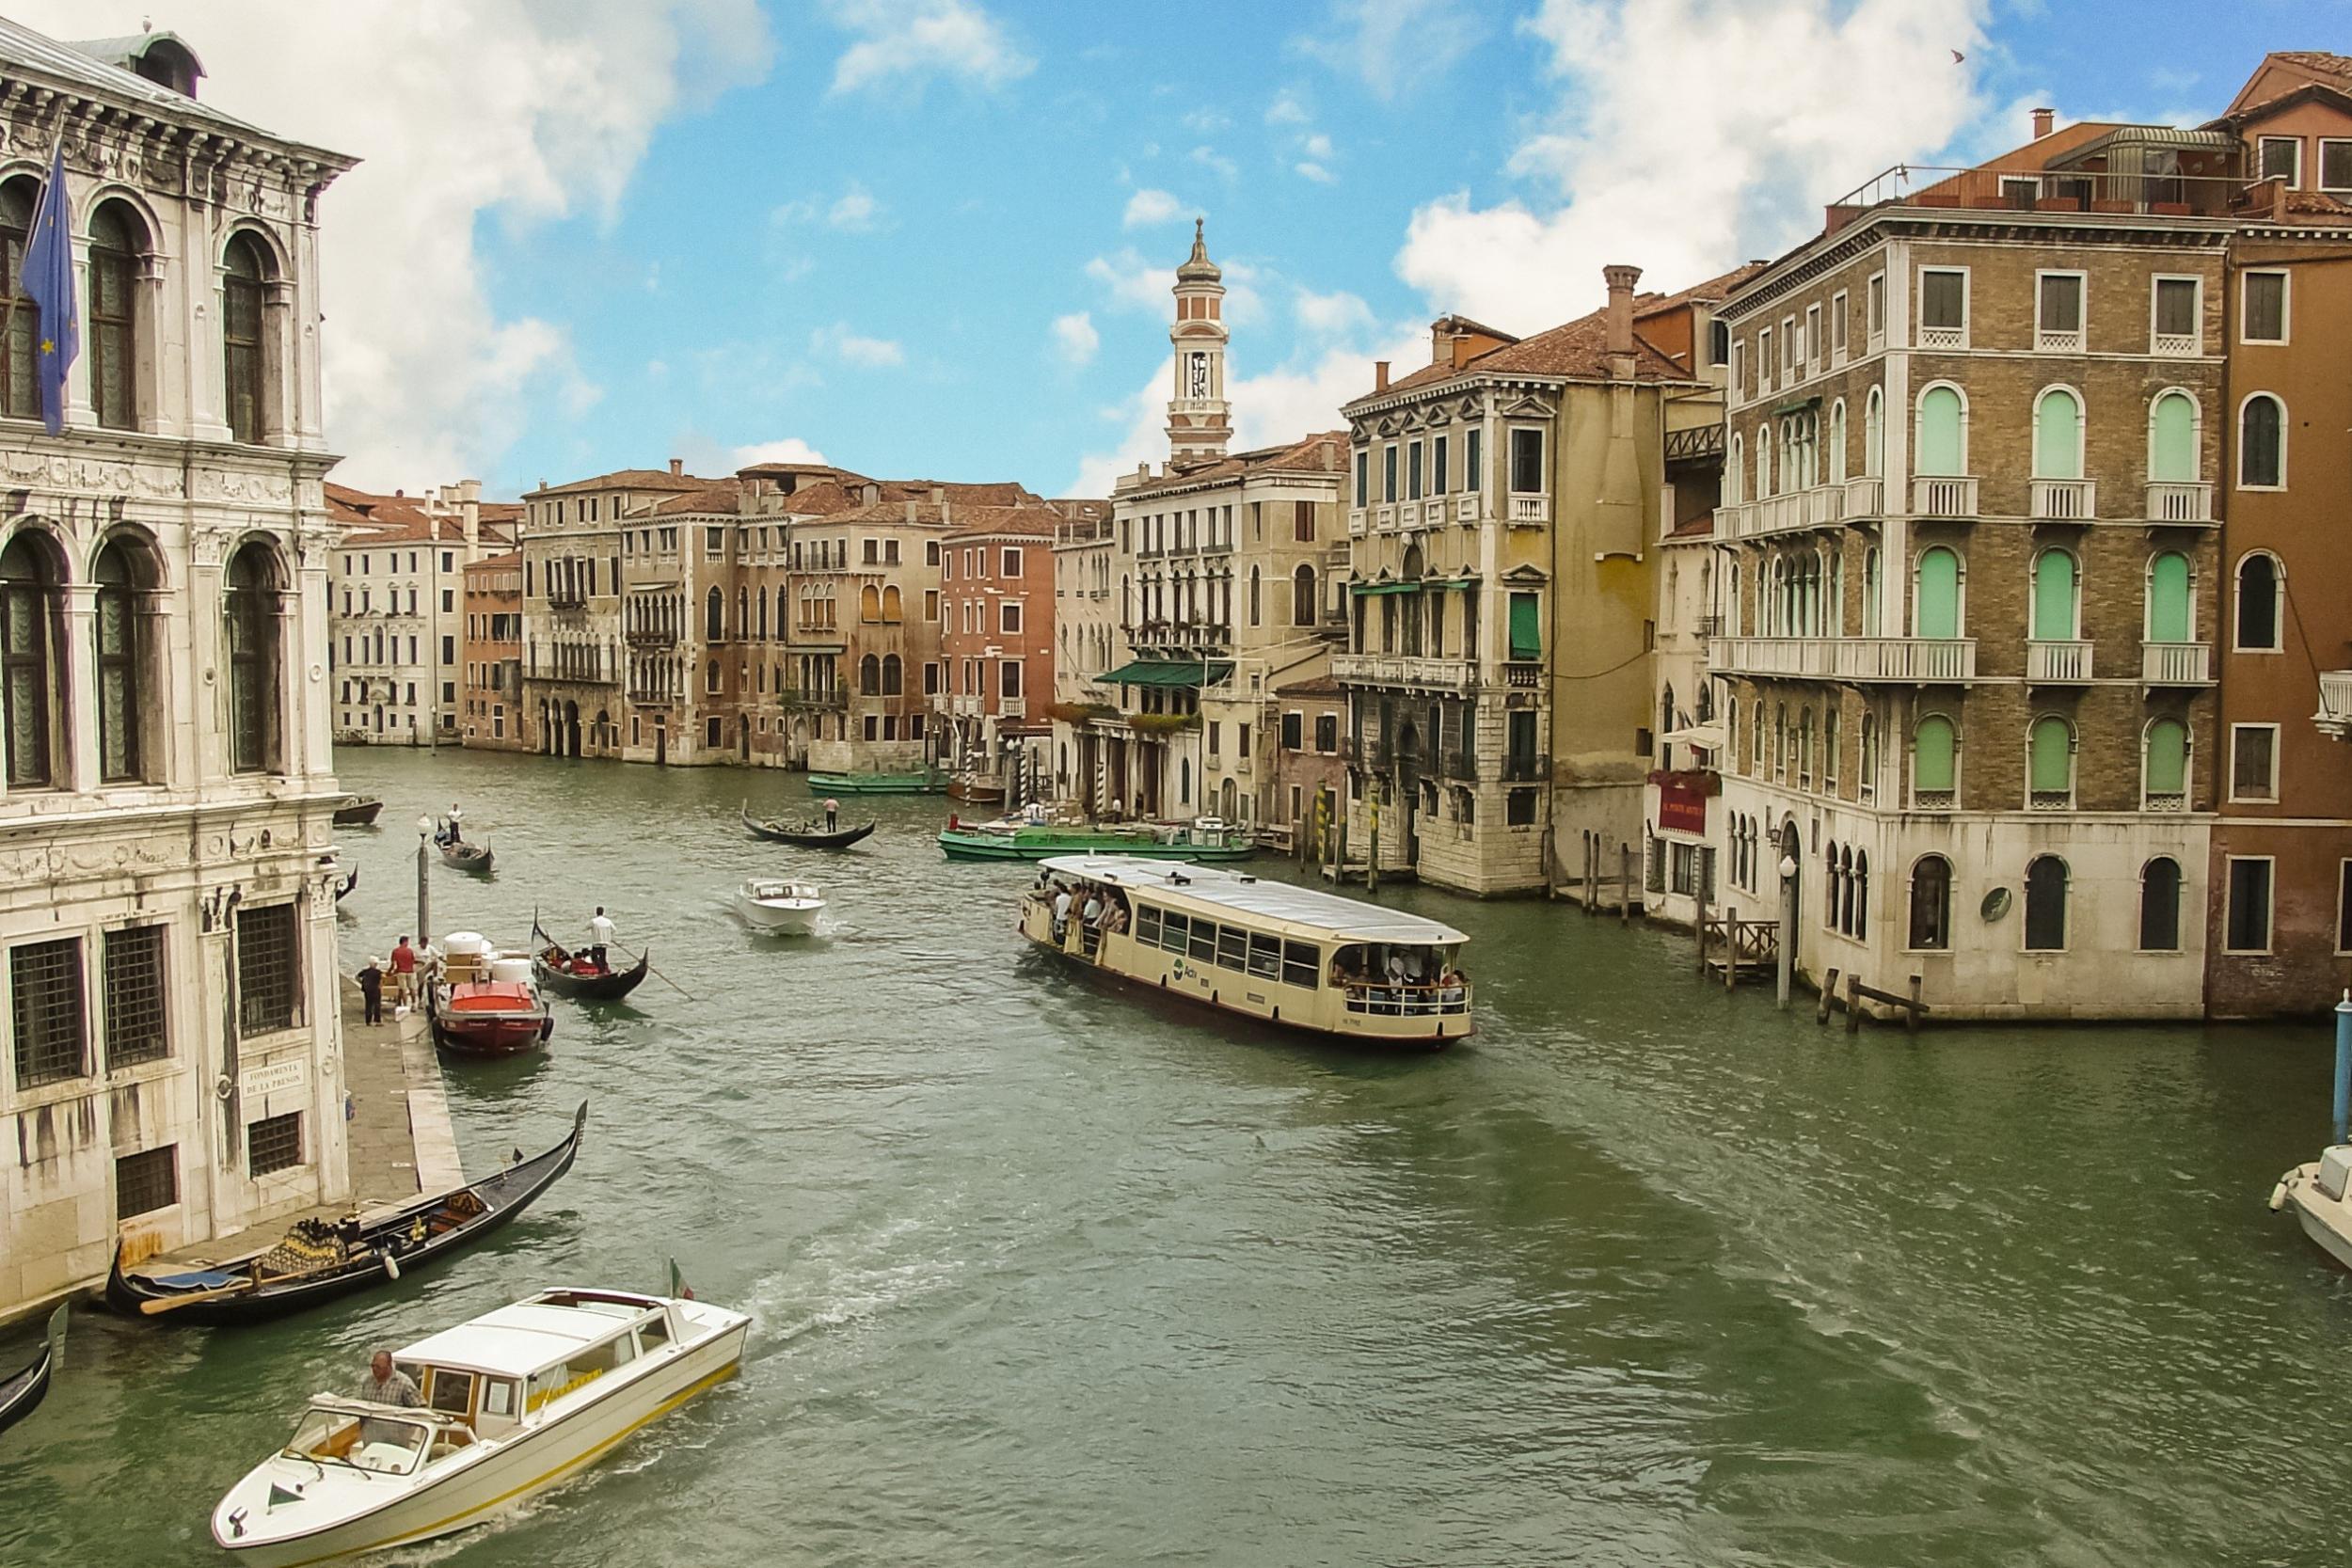 Taking a ‘vaporetto’ along the Grand Canal offers great value for money